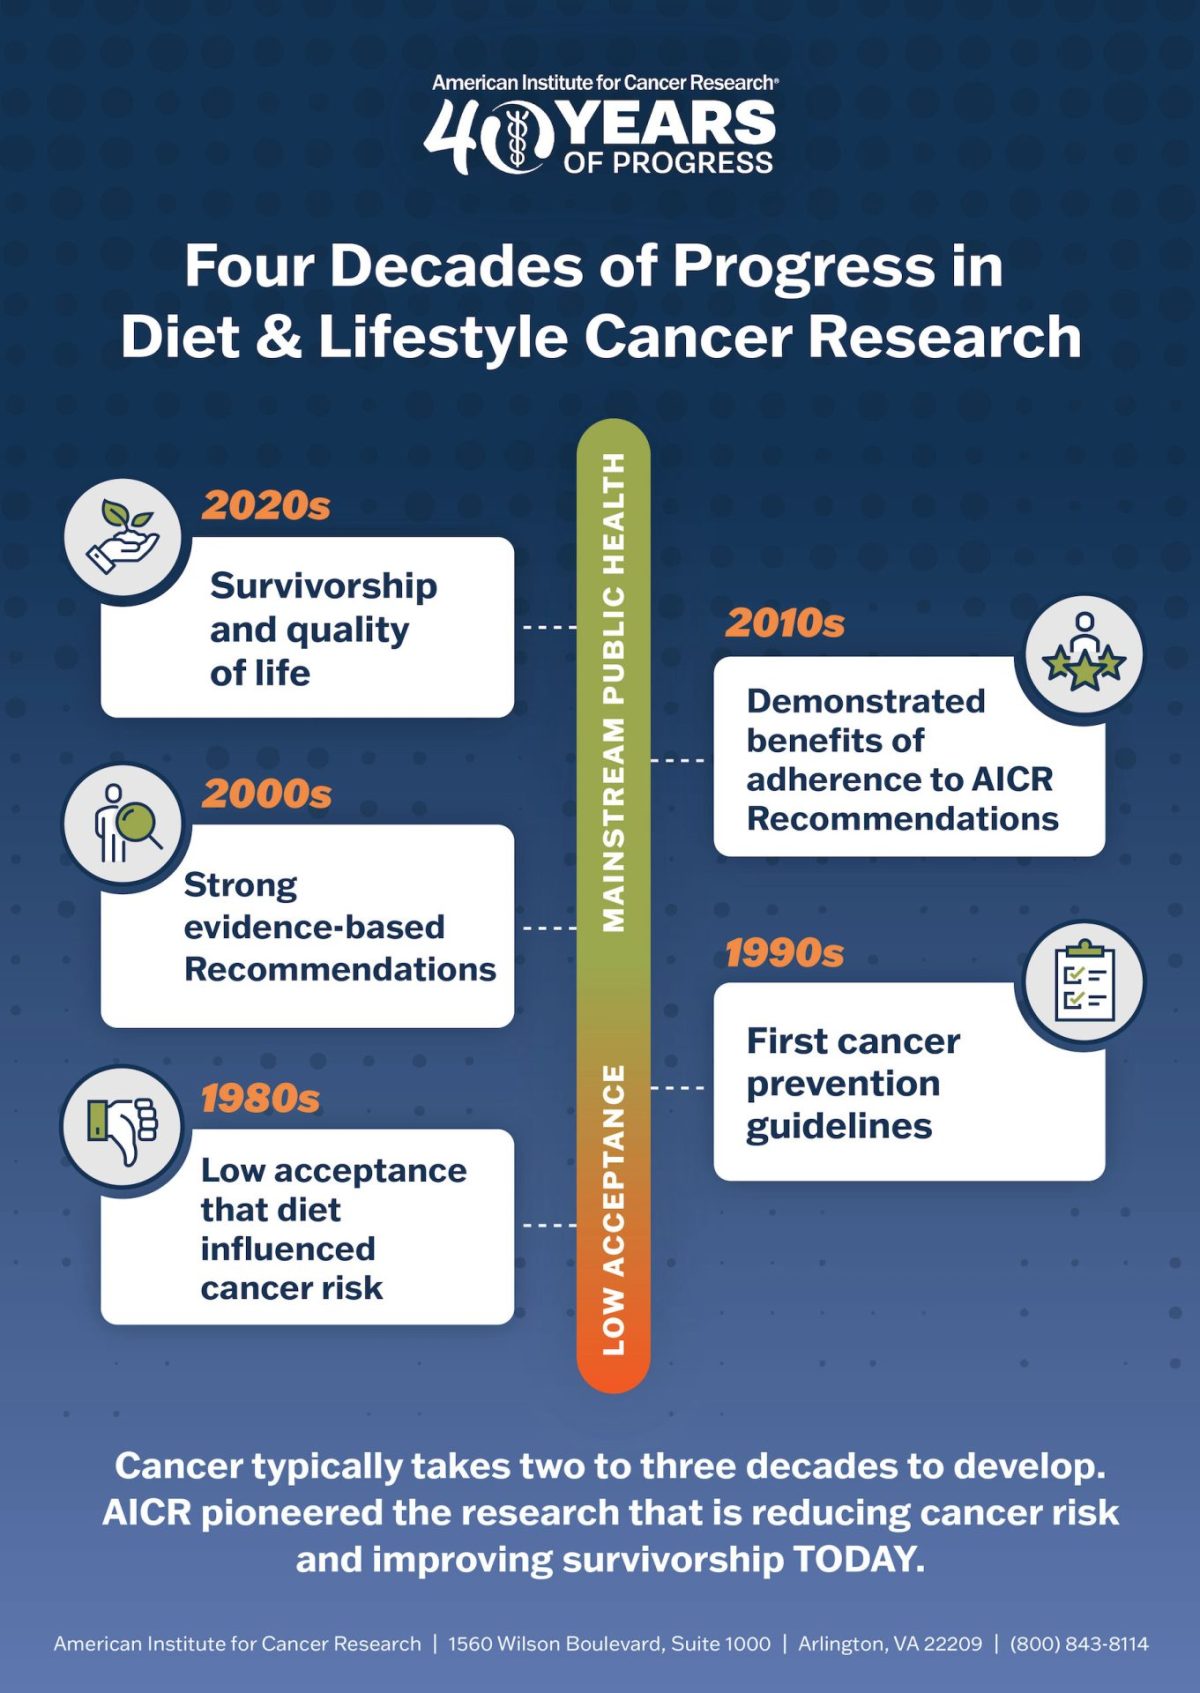 Diet and Lifestyle research